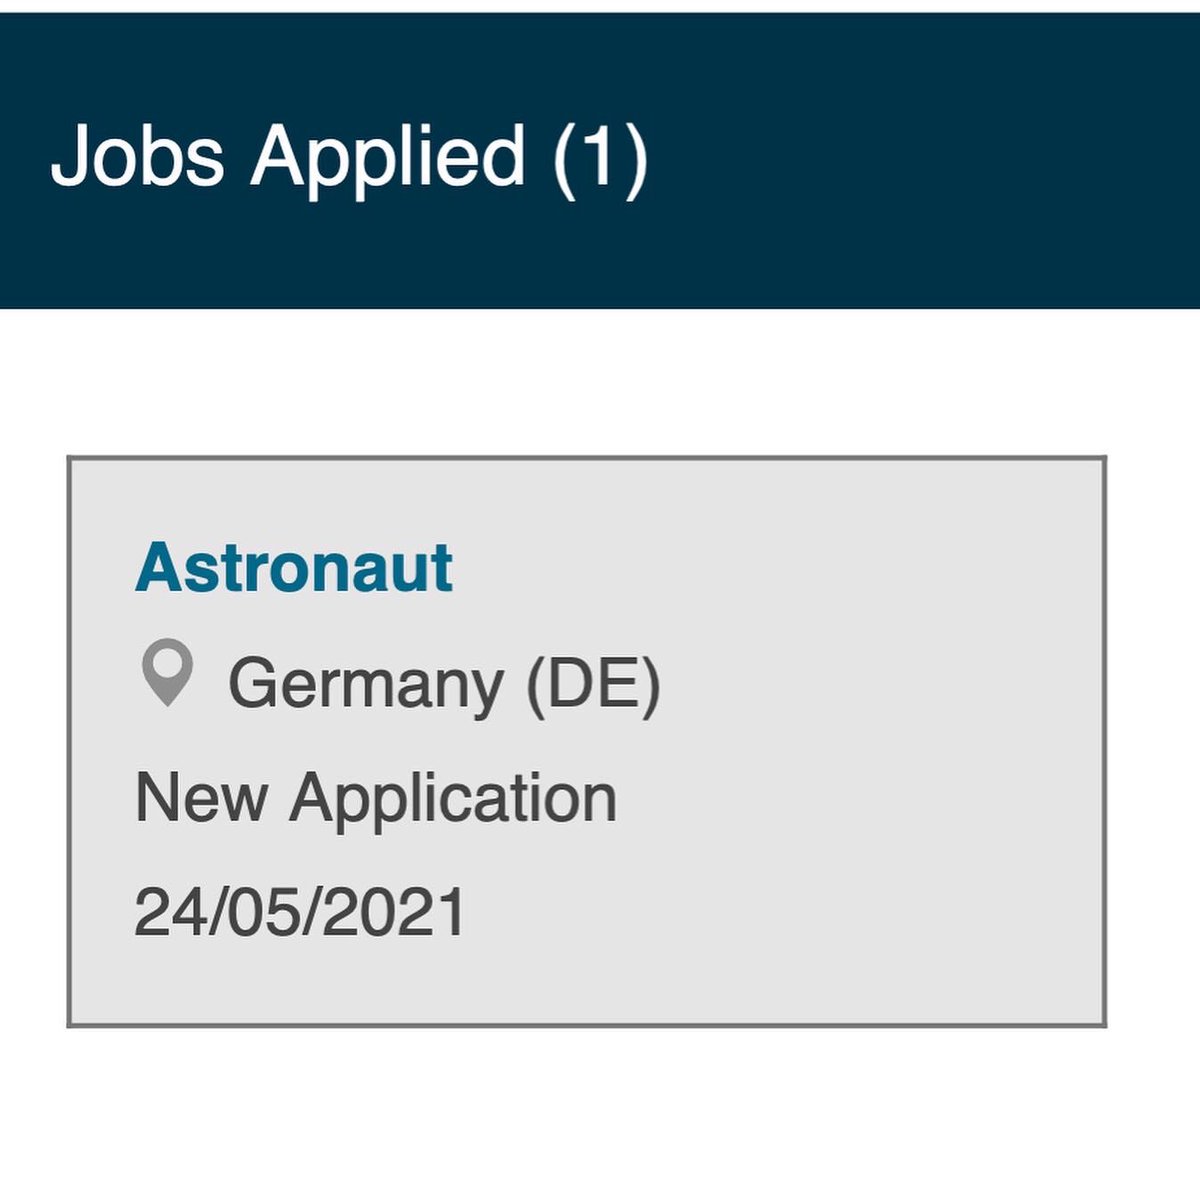 Applied! Biggest incentive for me is that a more diverse applicants crowd will lead to a more diverse astronaut crew. I don’t have illusions on the outcome for me, but really excited to see future astronauts representing the diversity of Europeans in space! #AstronautSelection